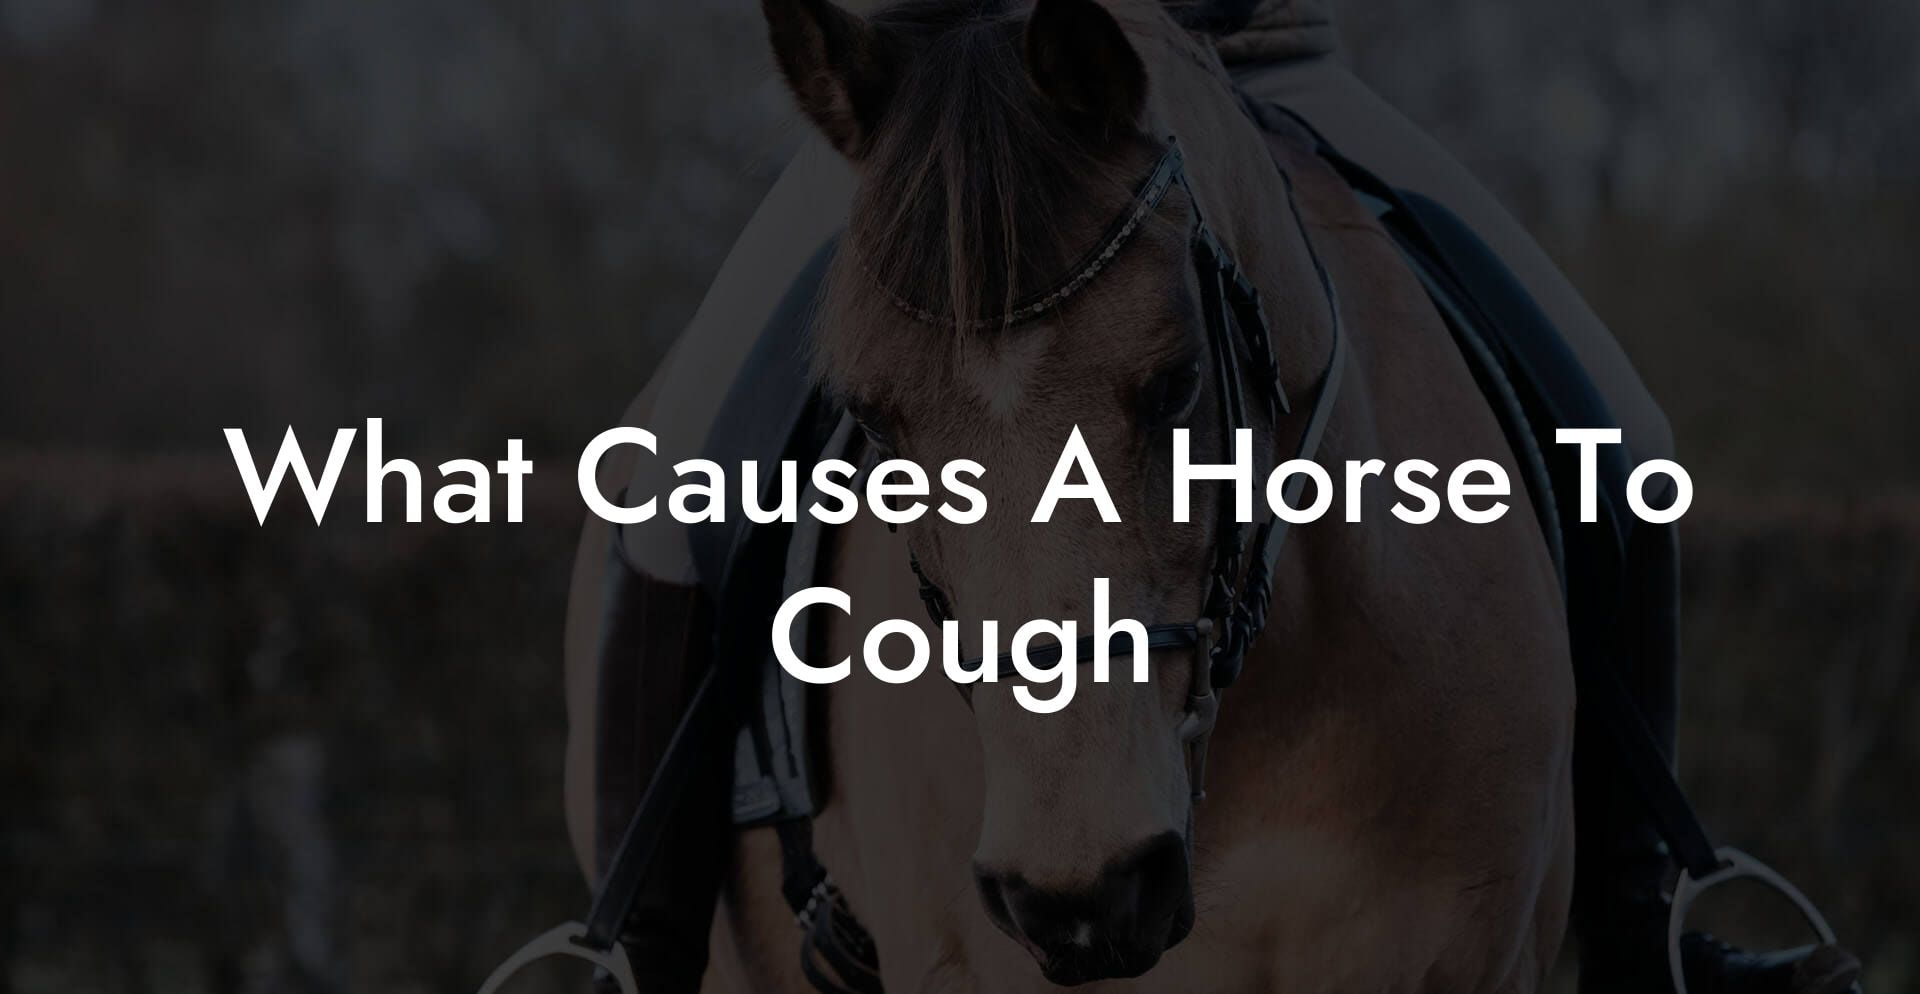 What Causes A Horse To Cough